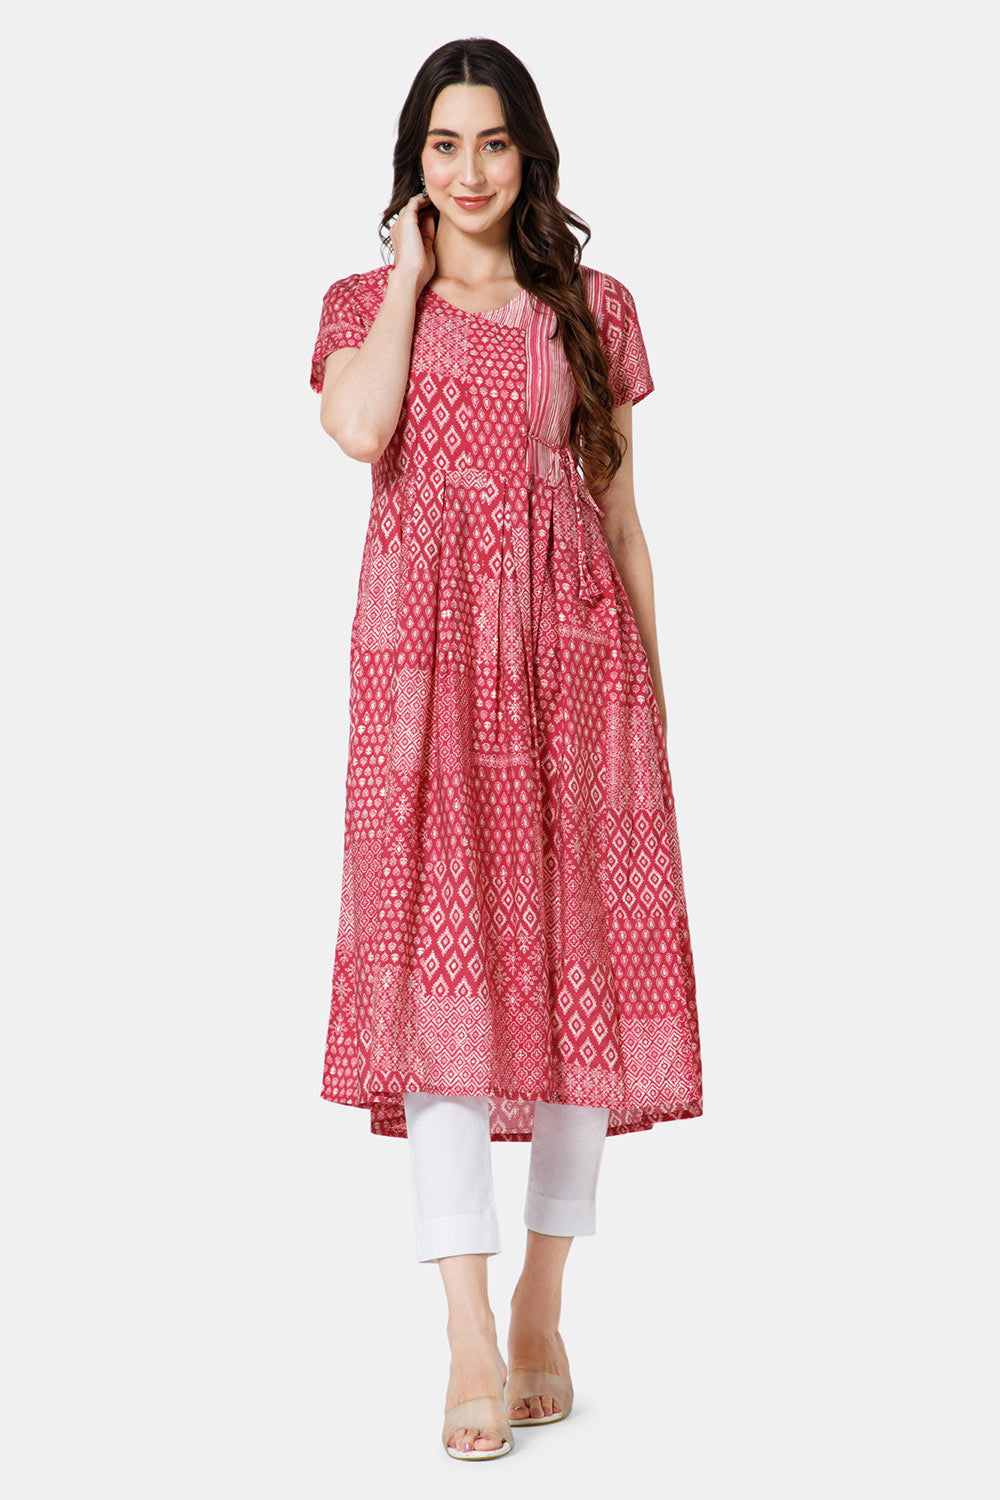 Top 20 Popular Pakistani Clothing Brands in USA - 2023 – String & Thread